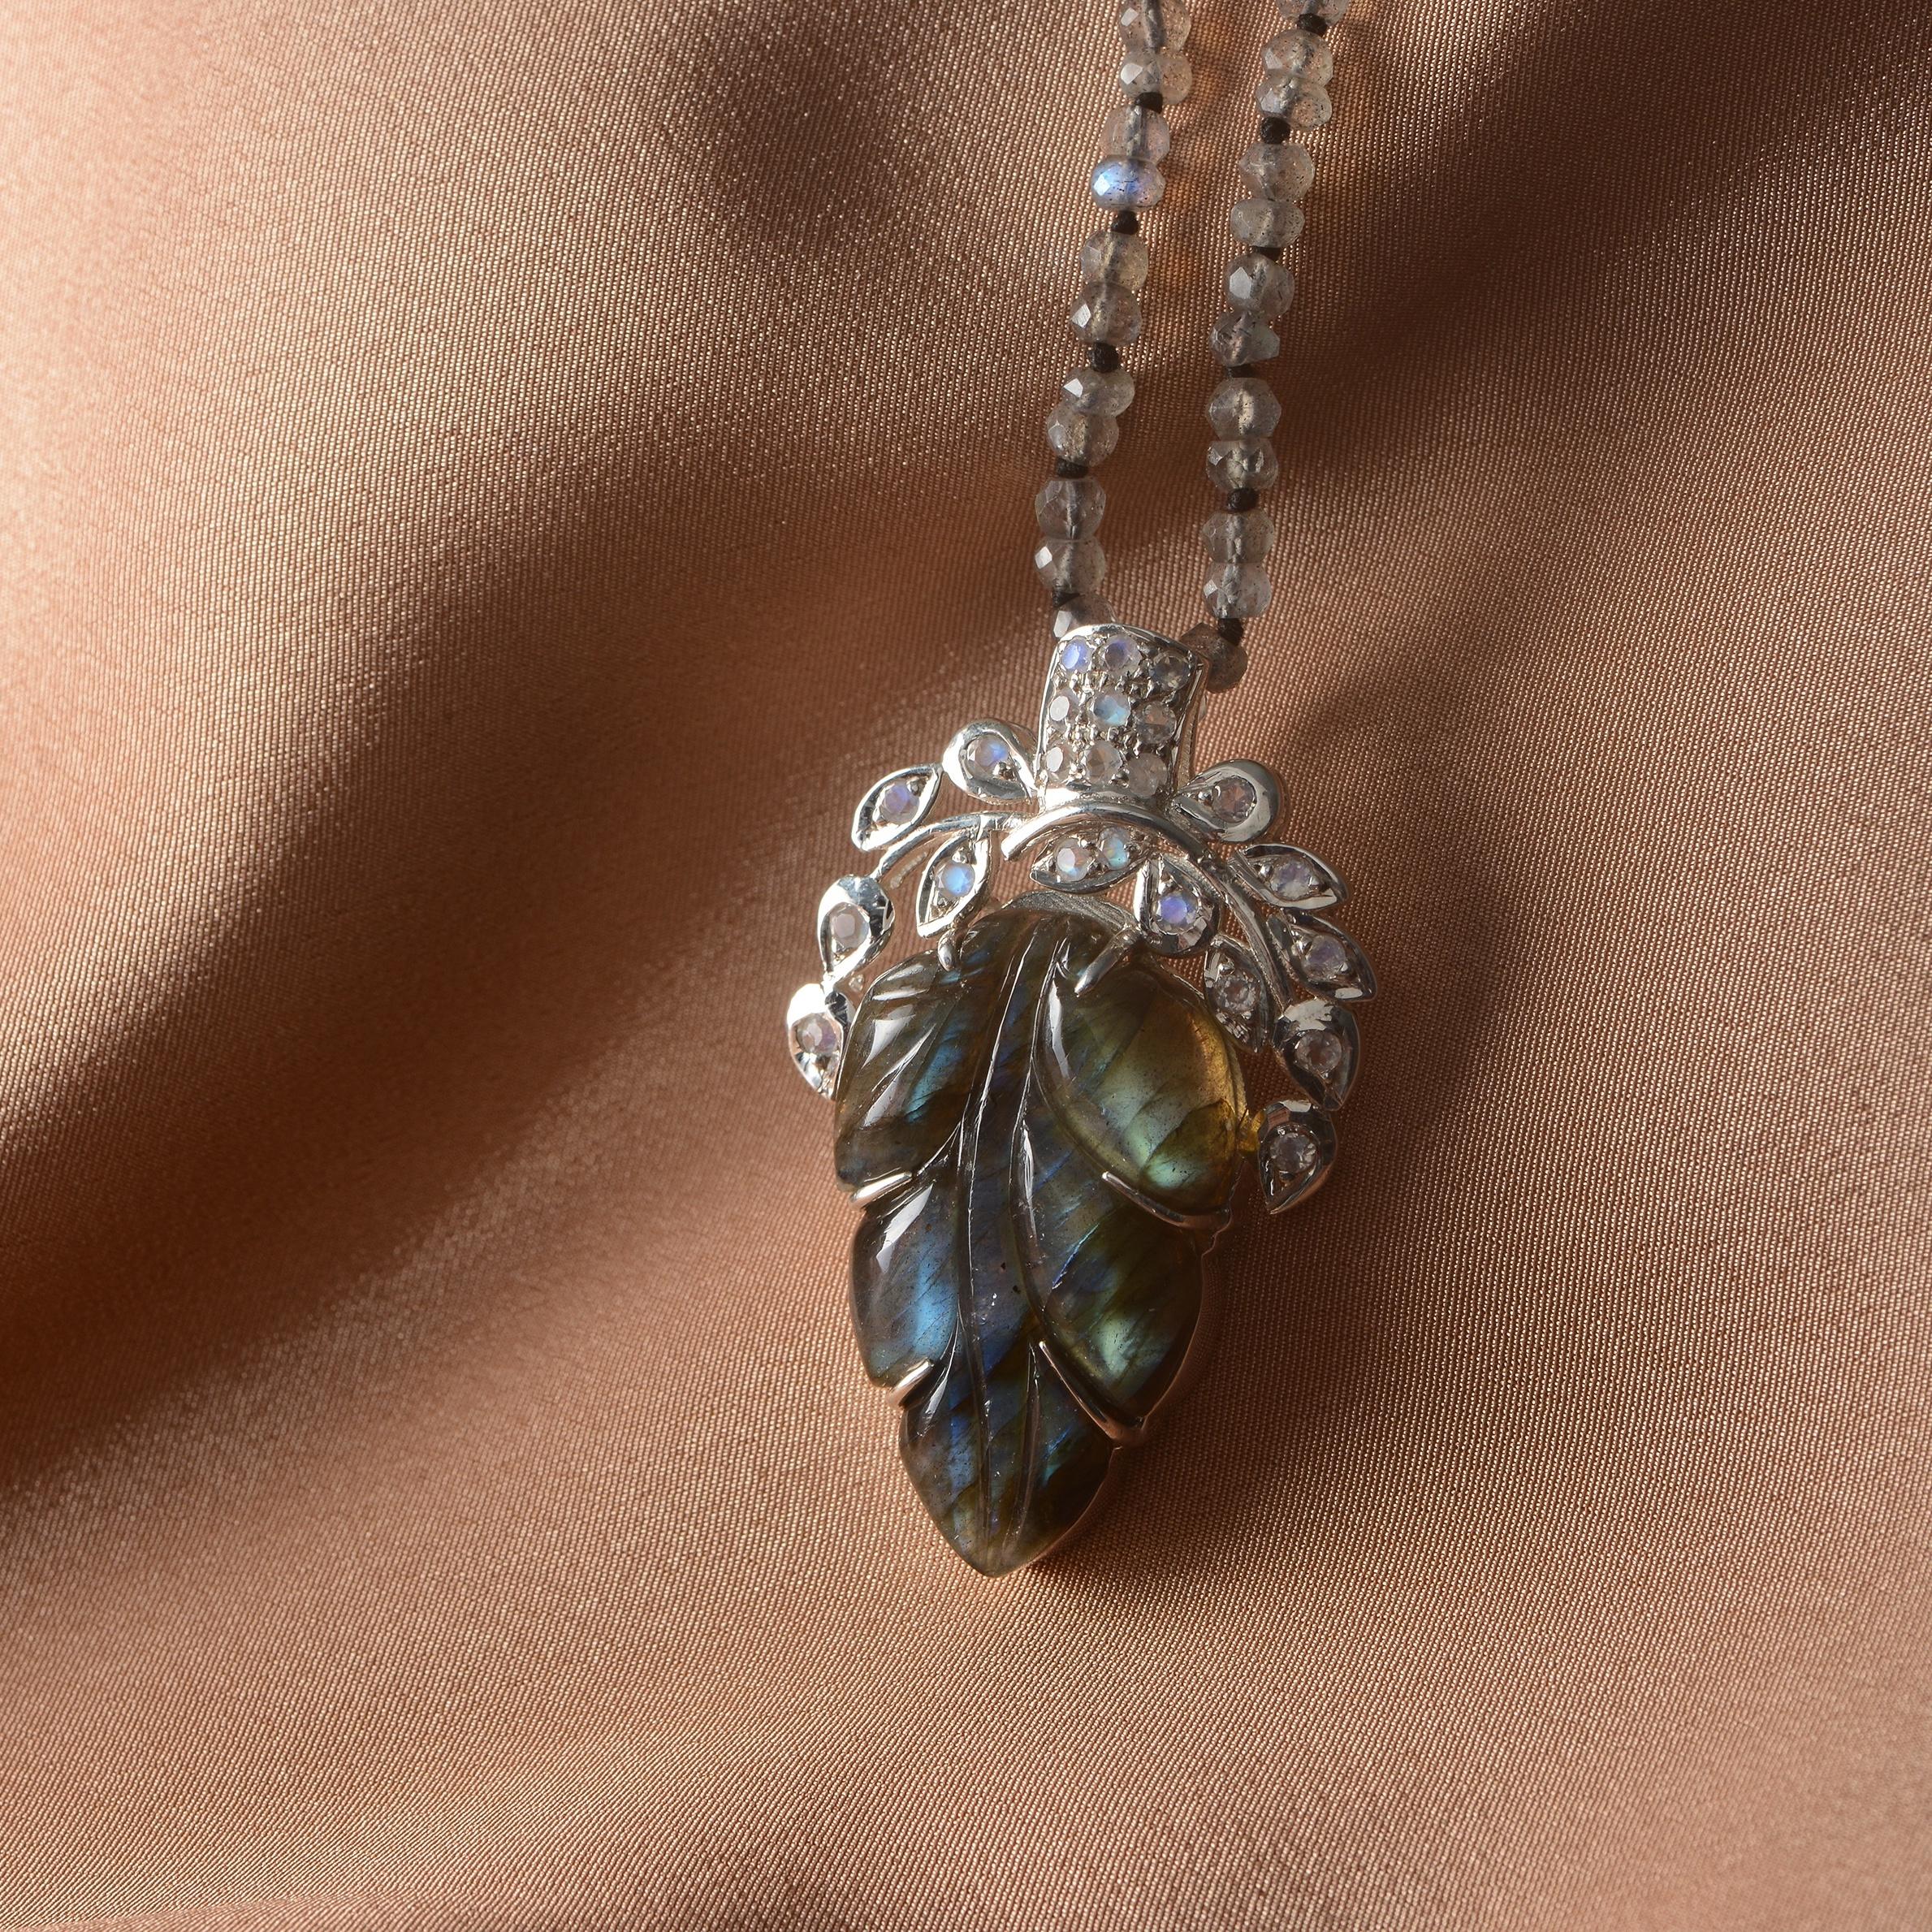 Using the ancient art of stone-carving this one-of-a-kind labradorite pendant has been hand-engraved and hand-carved using a leaf pattern. The pendant which is made in sterling silver has rainbow moonstones embedded in the top and comes with a 28